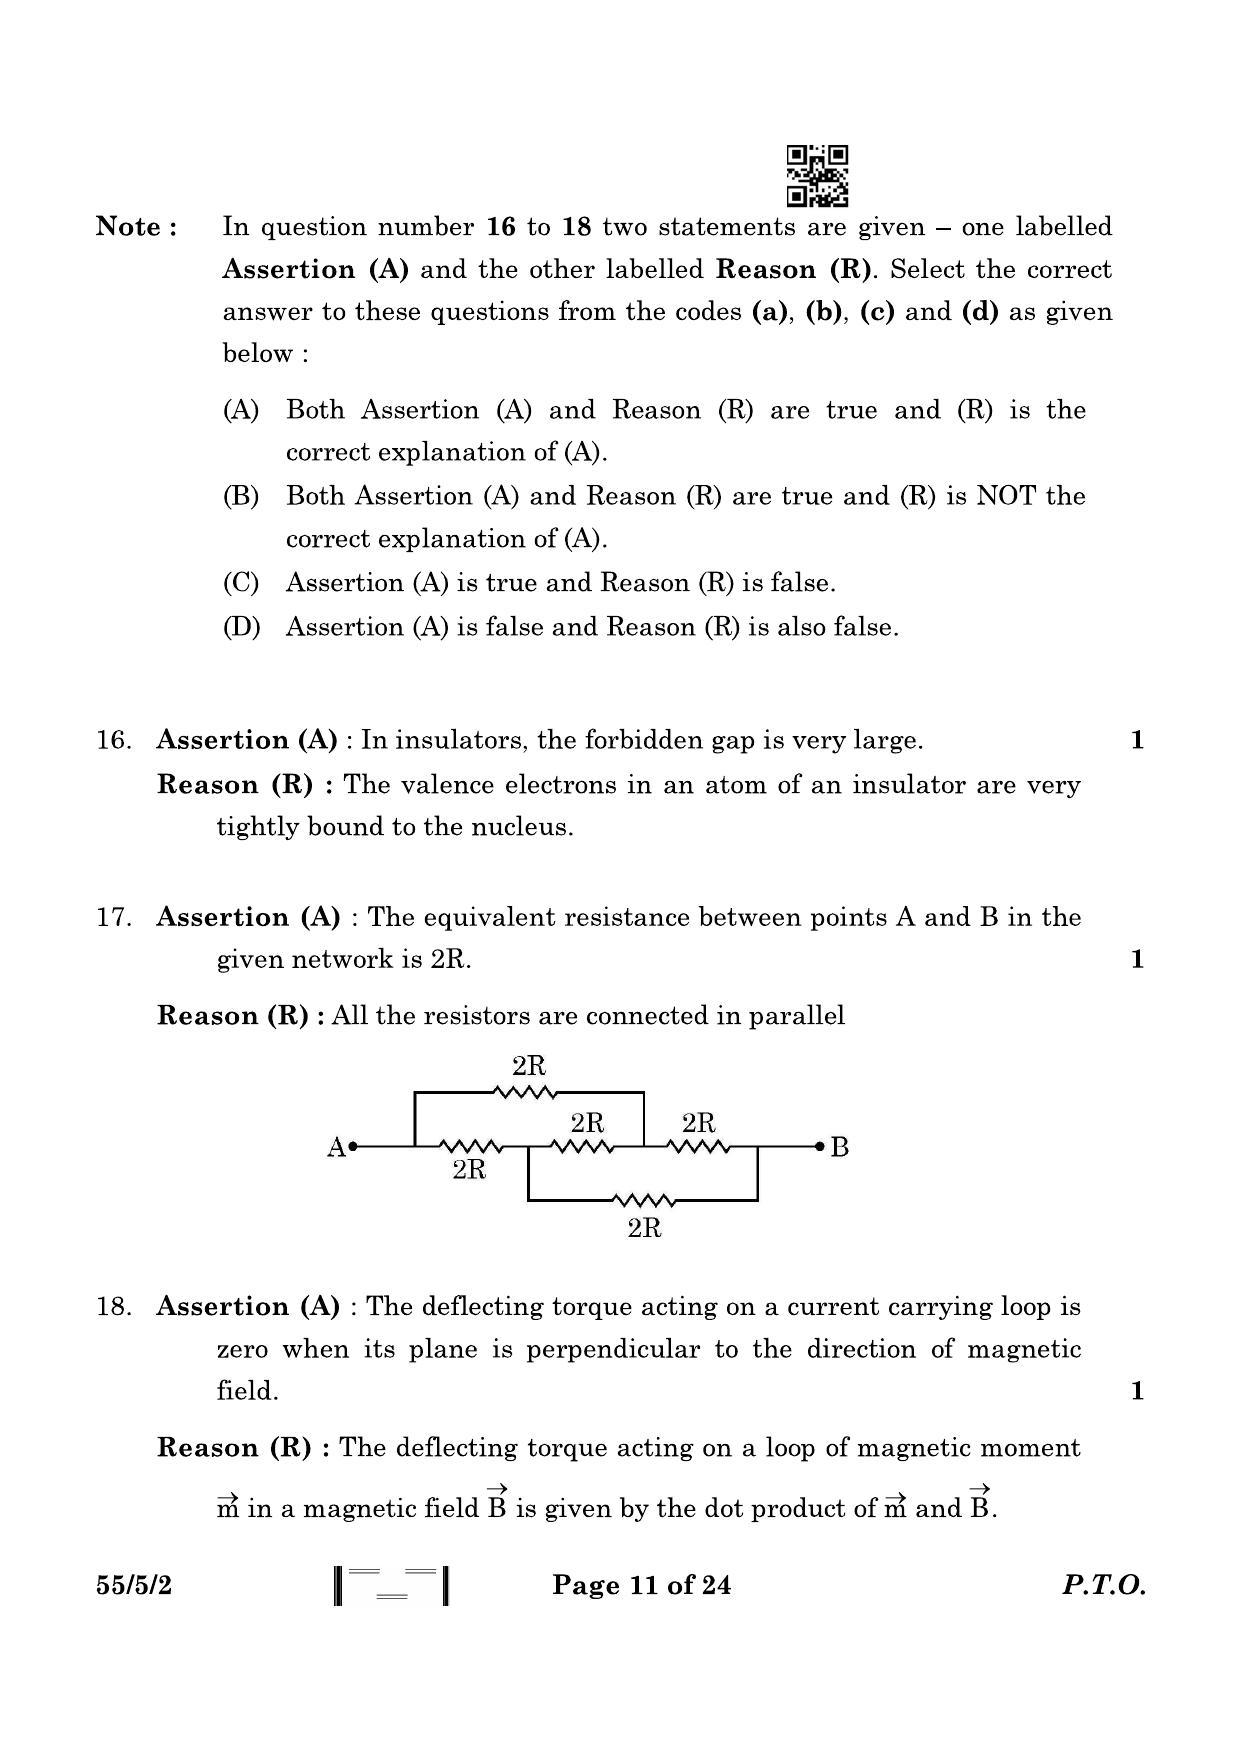 CBSE Class 12 55-5-2 Physics 2023 Question Paper - Page 11